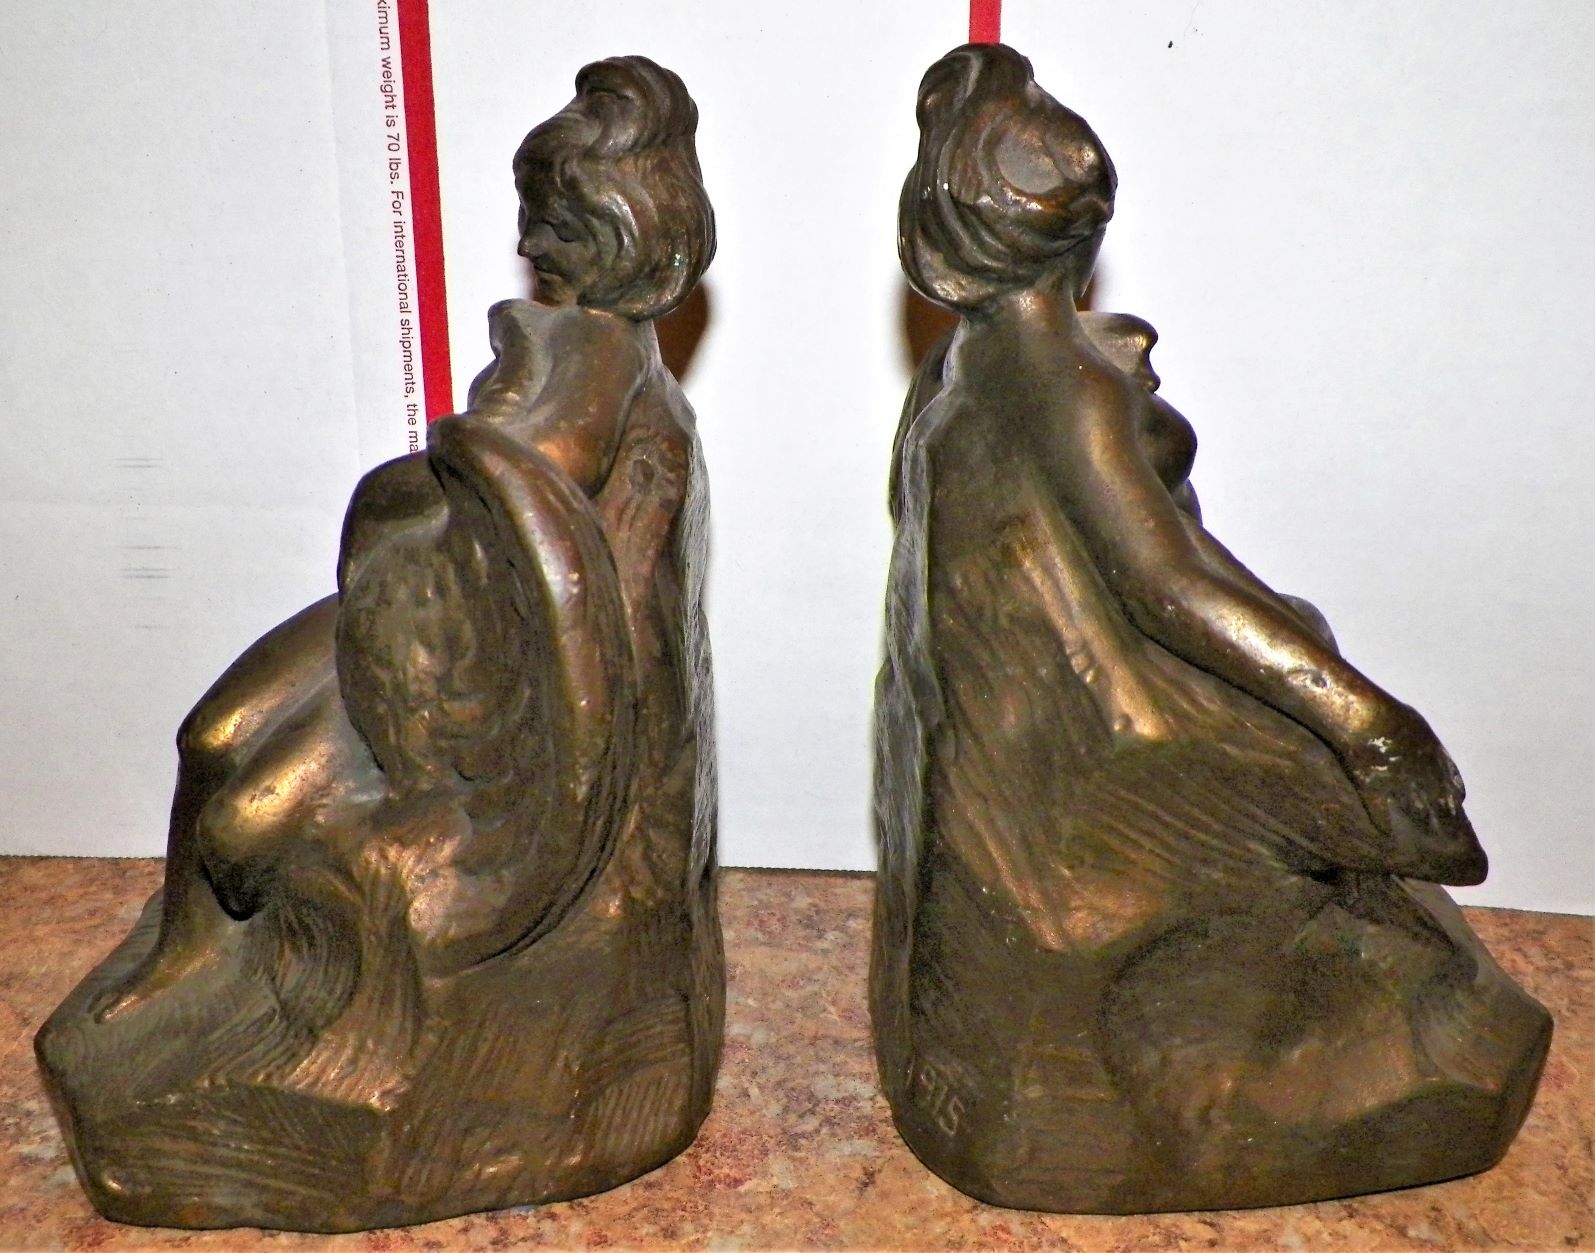 COLLECTIBLE BOOKENDS S MORANI 1915  3AA.JPG